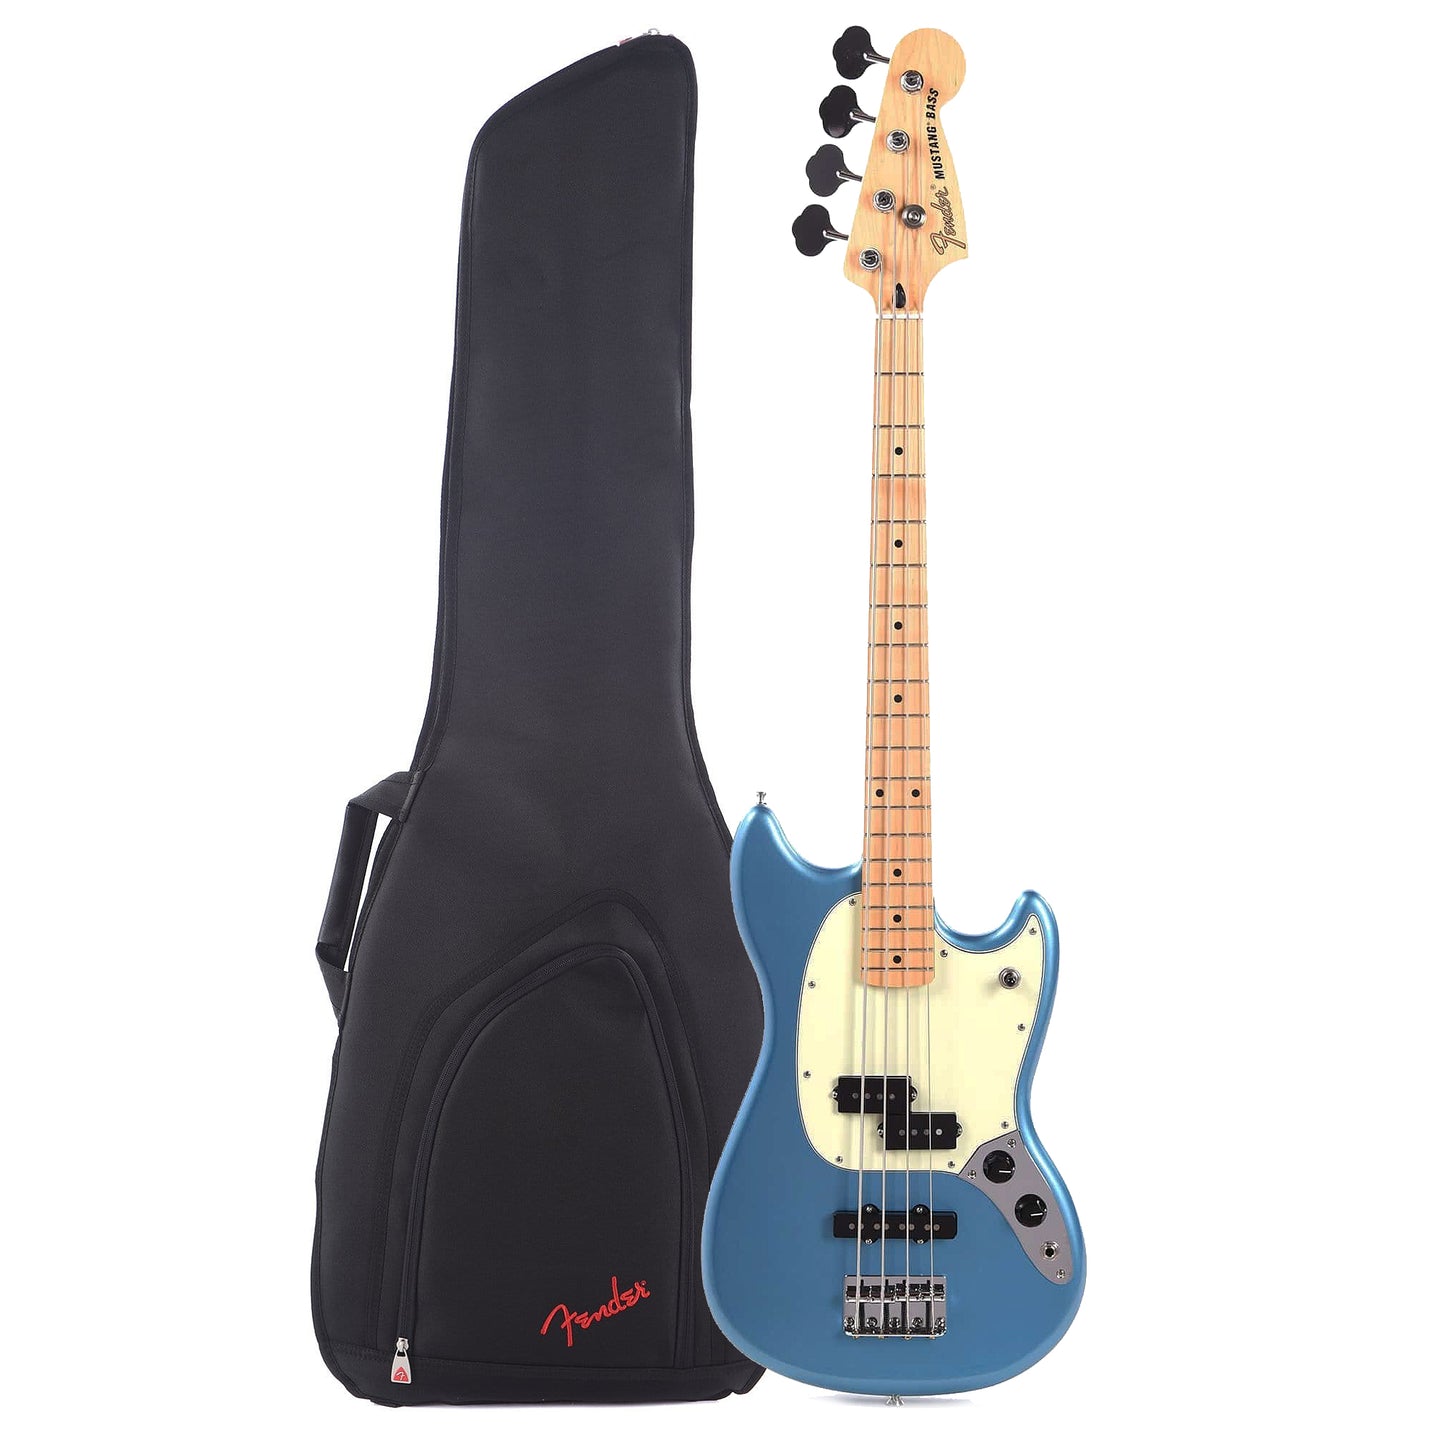 Fender Player Mustang Bass PJ Lake Placid Blue w/3-Ply Mint Pickguard and FBSS-610 Short Scale Bass Gig Bag Bundle